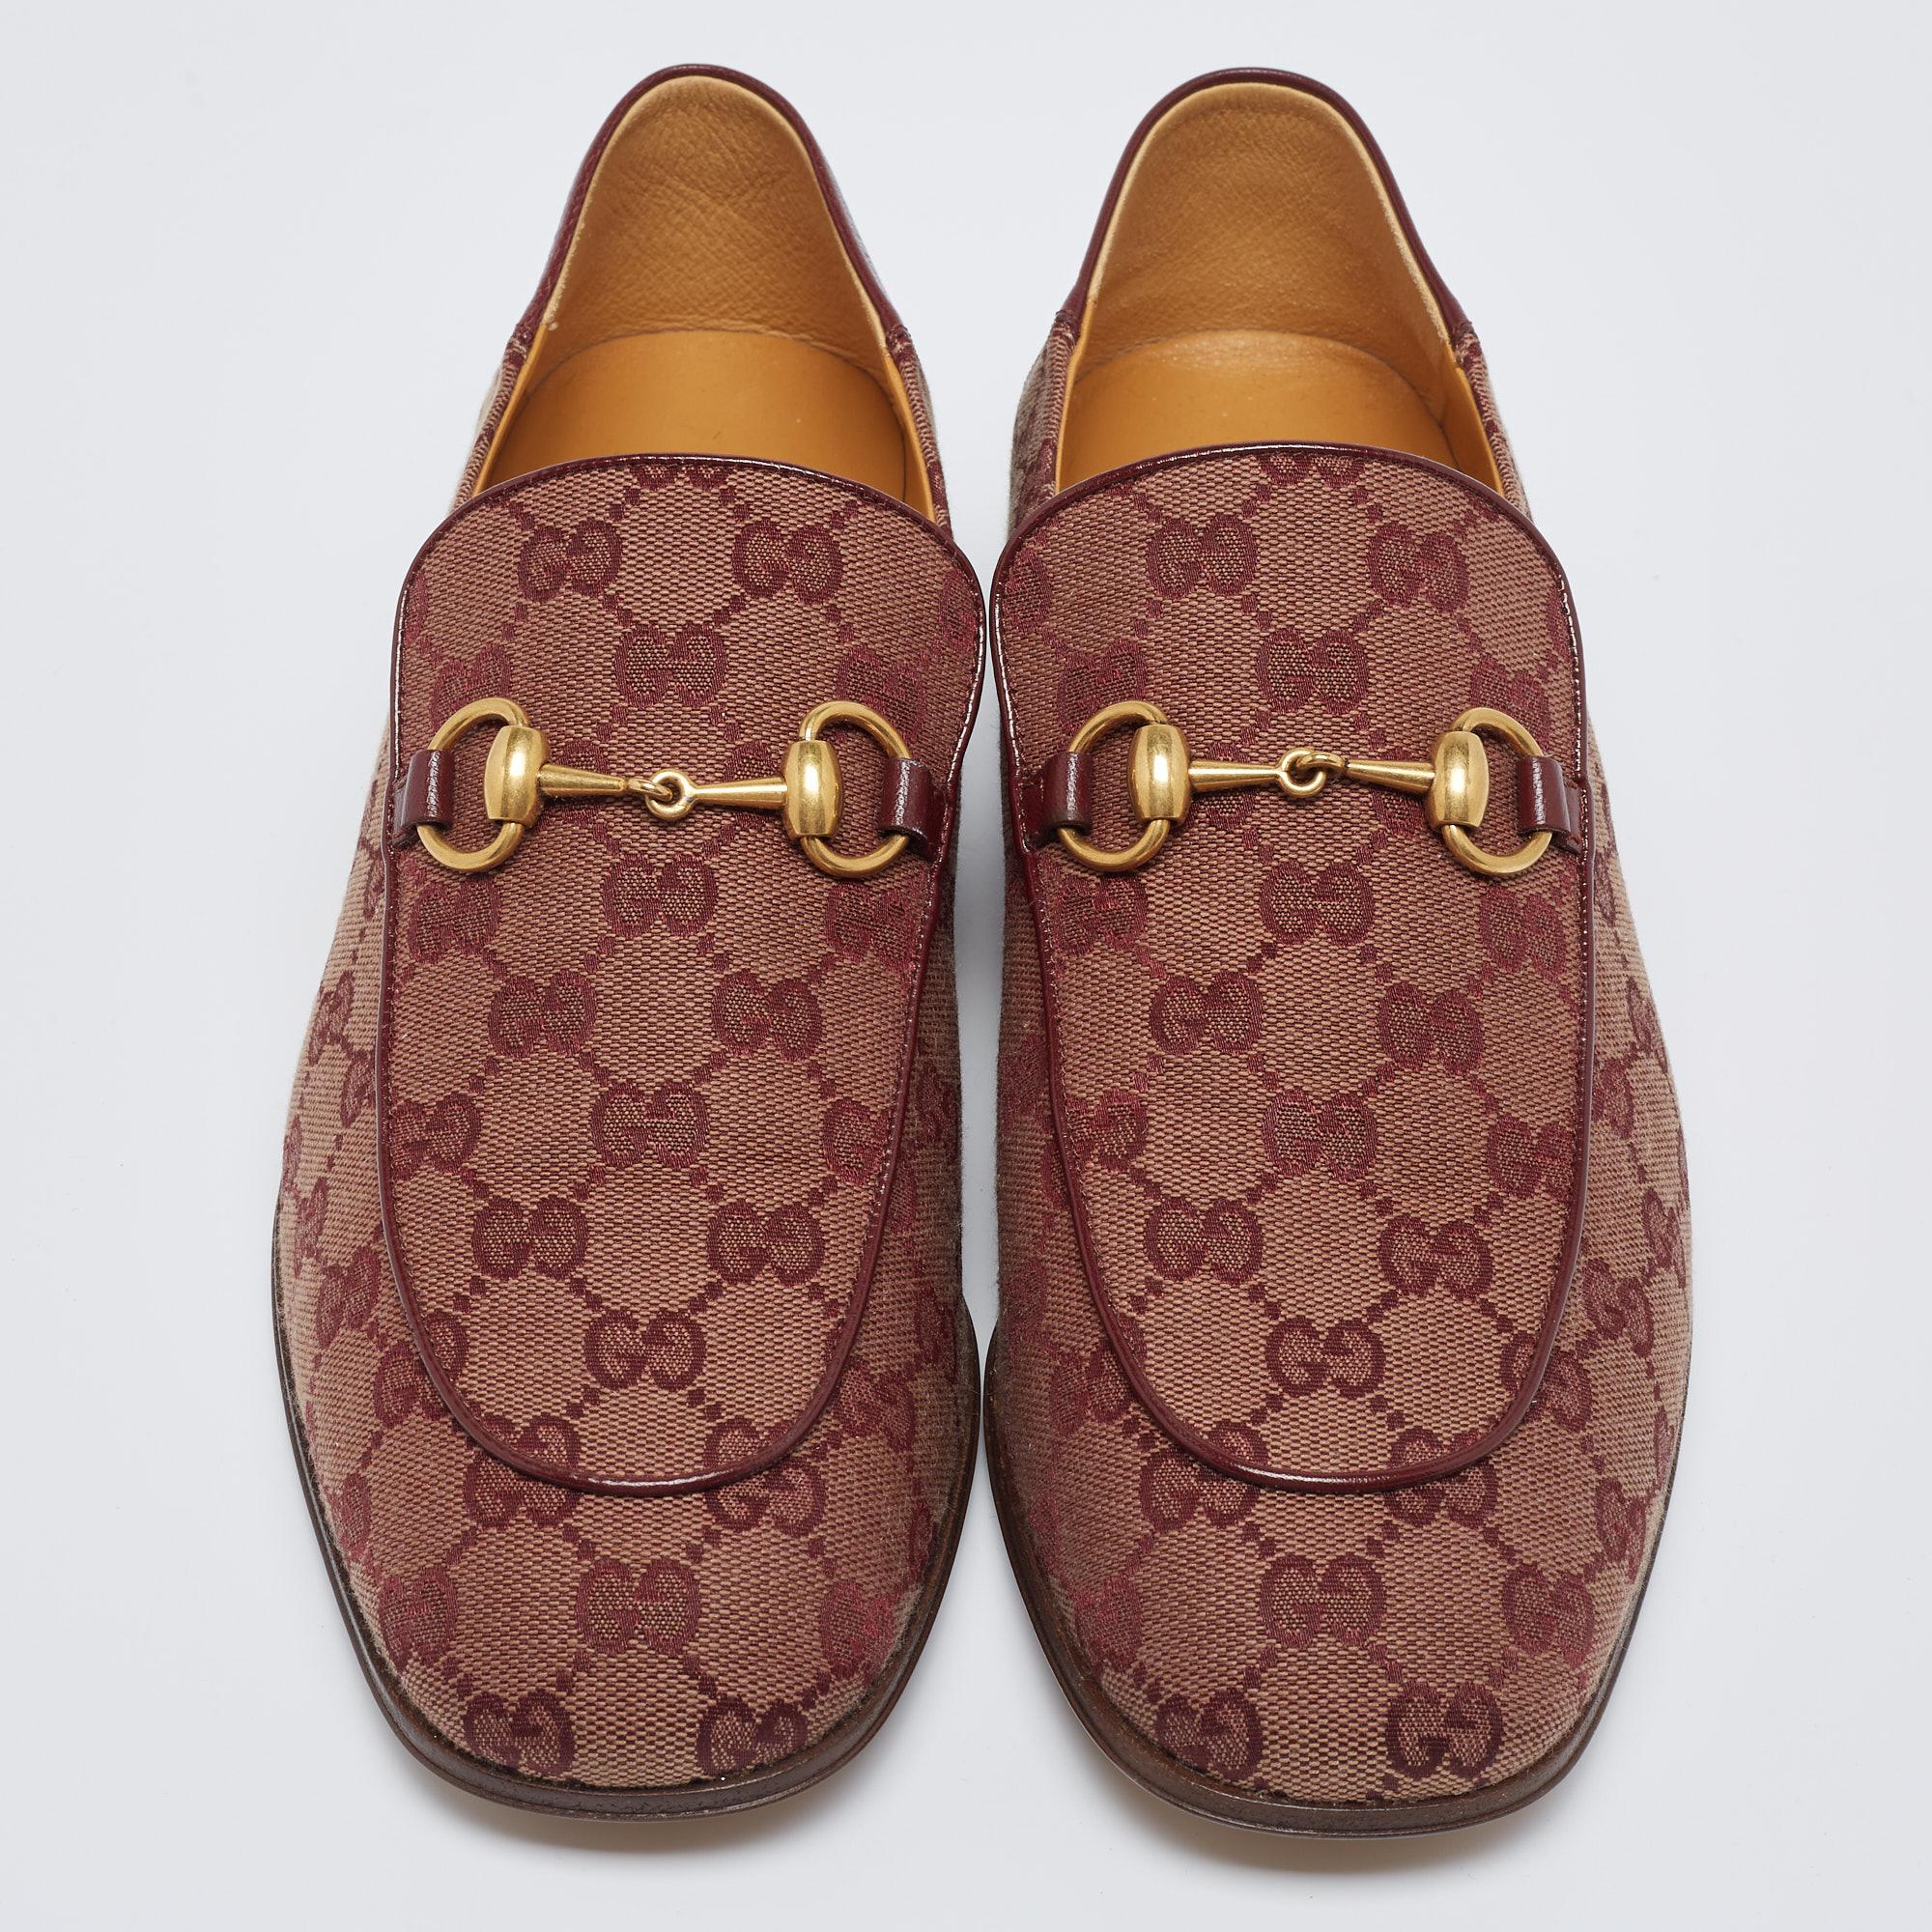 Incorporate an element of class into your ensemble with these Quentin loafers from the House of Gucci. They are crafted using burgundy-beige GG canvas, with a gold-tone Horsebit motif perched on their vamps. They have an easy slip-on feature. These